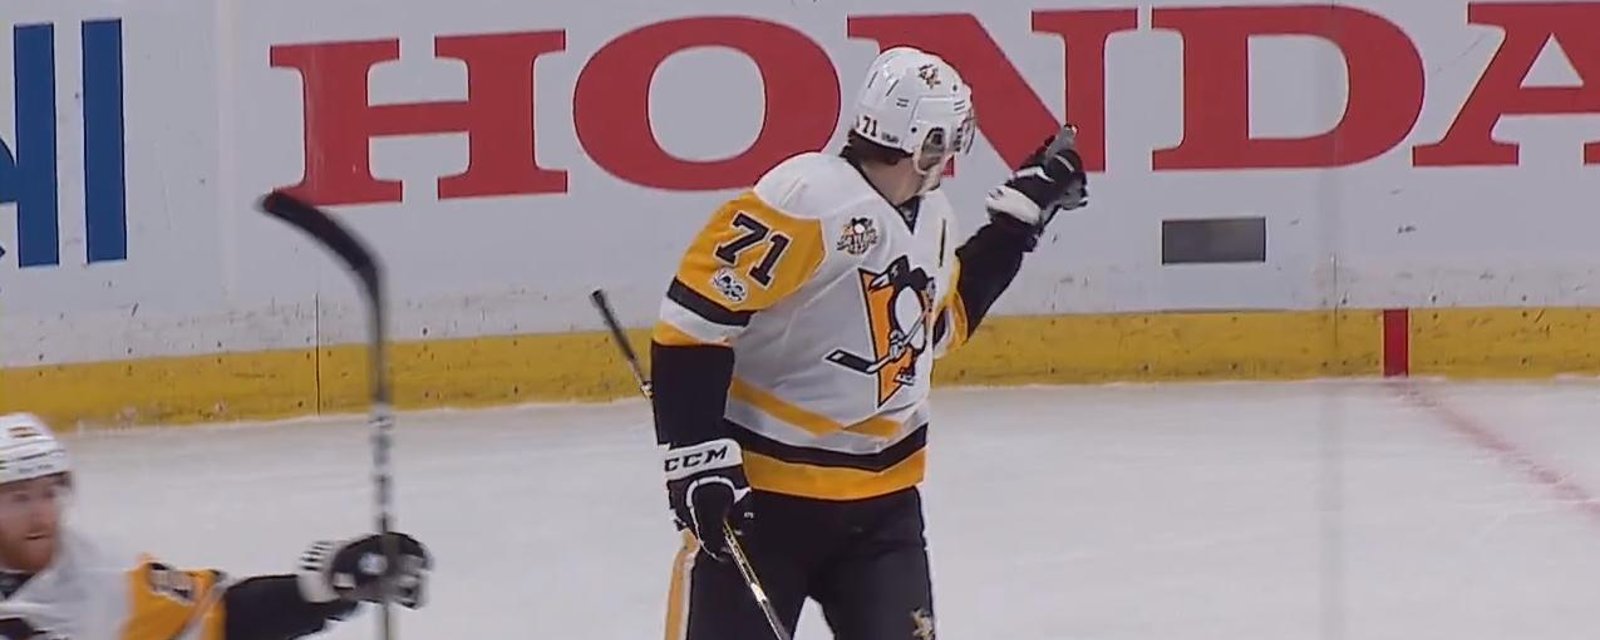 Breaking: Evgeni Malkin thanks Dion Phaneuf for the Penguins 3rd goal of the game!